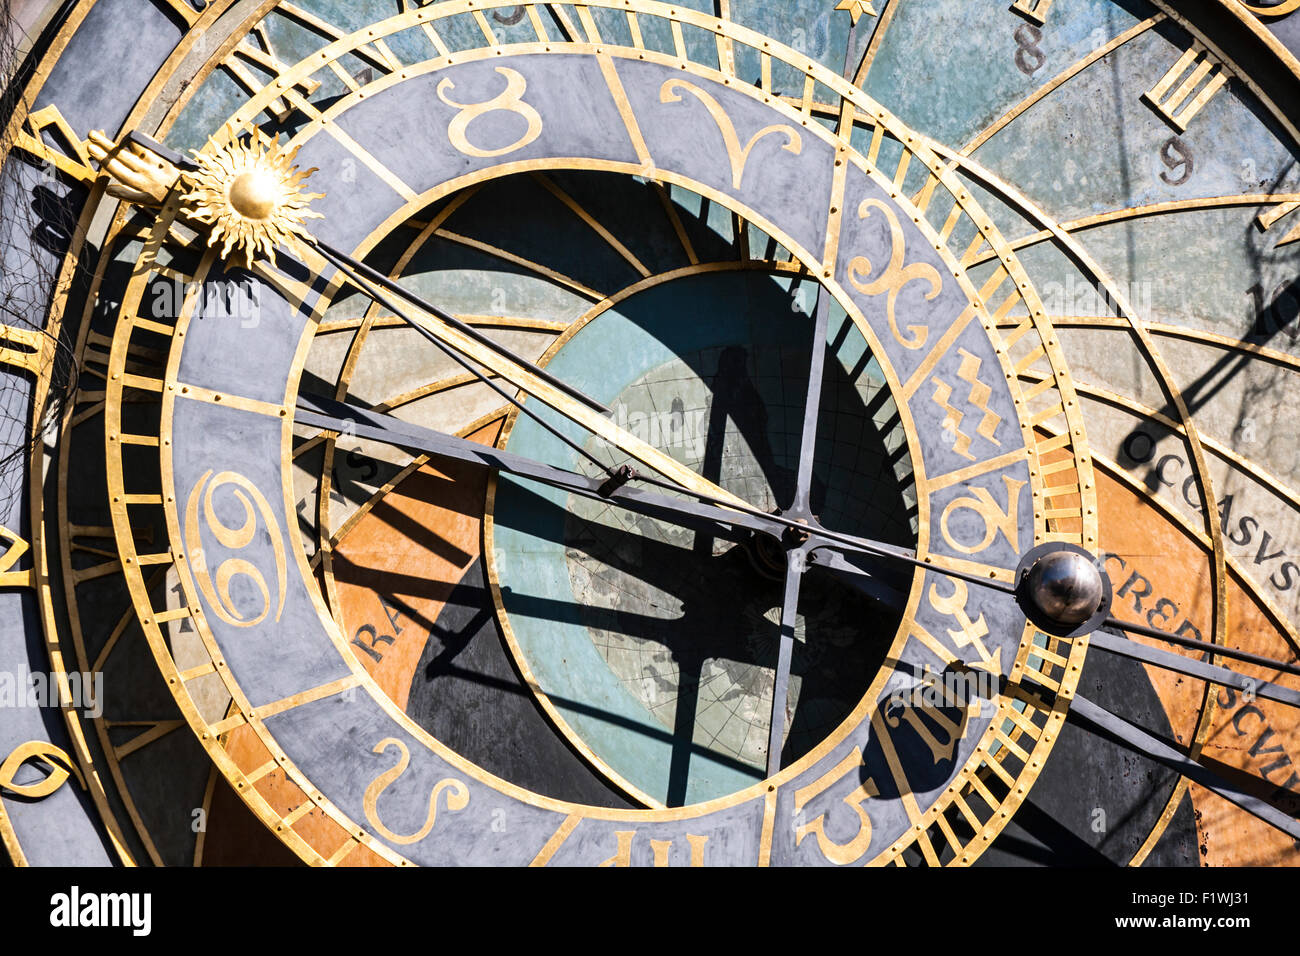 Detail of the Astronomical Clock face in the Old Town City Hall, Prague, Czech Republic. Stock Photo